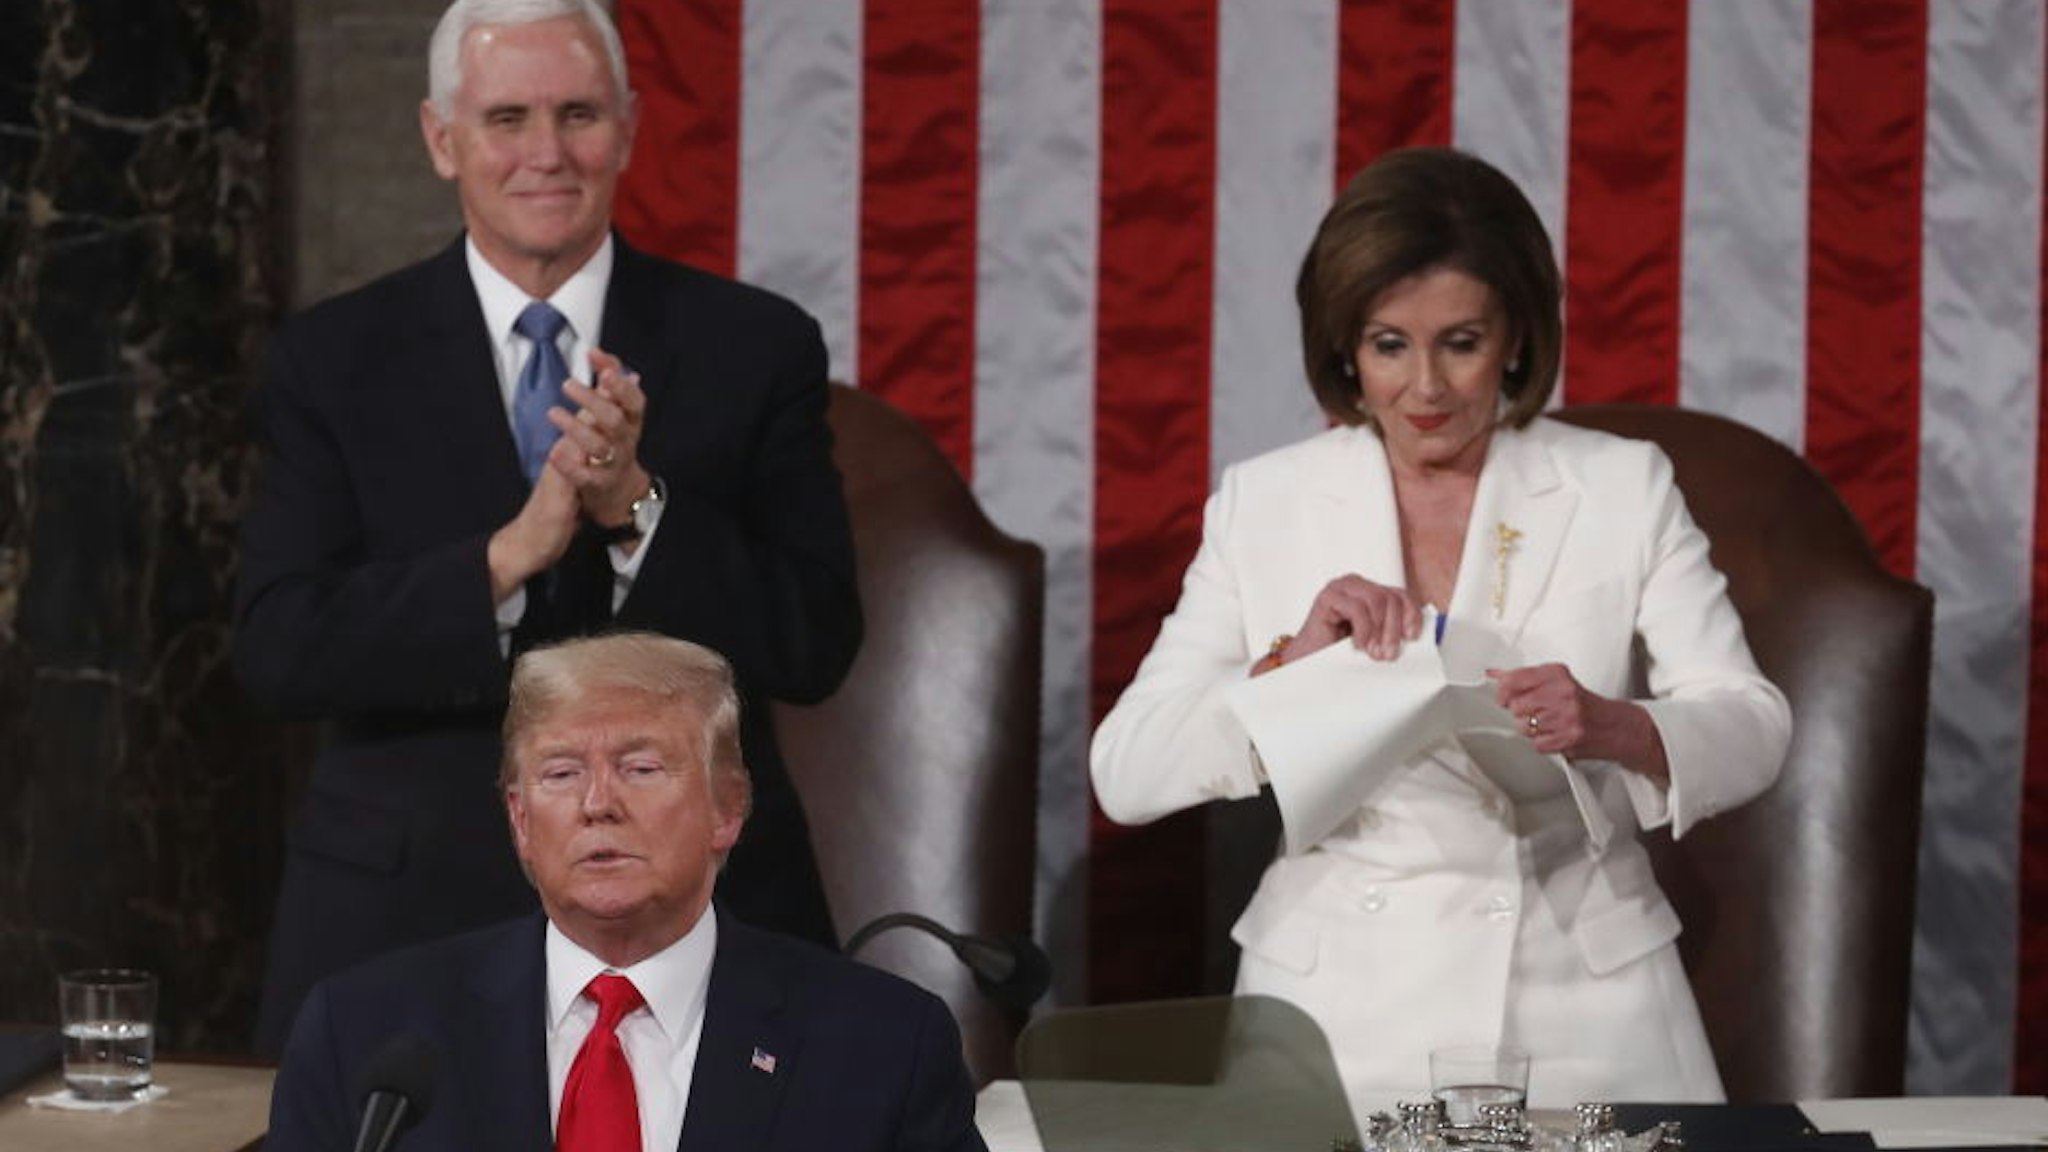 Speaker of the House Nancy Pelosi, a Democrat from California, right, rips up papers after U.S. President Donald Trump, bottom left, delivers a State of the Union address to a joint session of Congress at the U.S. Capitol in Washington, D.C., U.S., on Tuesday, Feb. 4, 2020. President Donald Trump will try to move past his impeachment and make a case for his re-election in Tuesday's State of the Union address by taking credit for a strong economy, newly signed trade deals and an immigration crackdown. Photographer: Andrew Harrer/Bloomberg